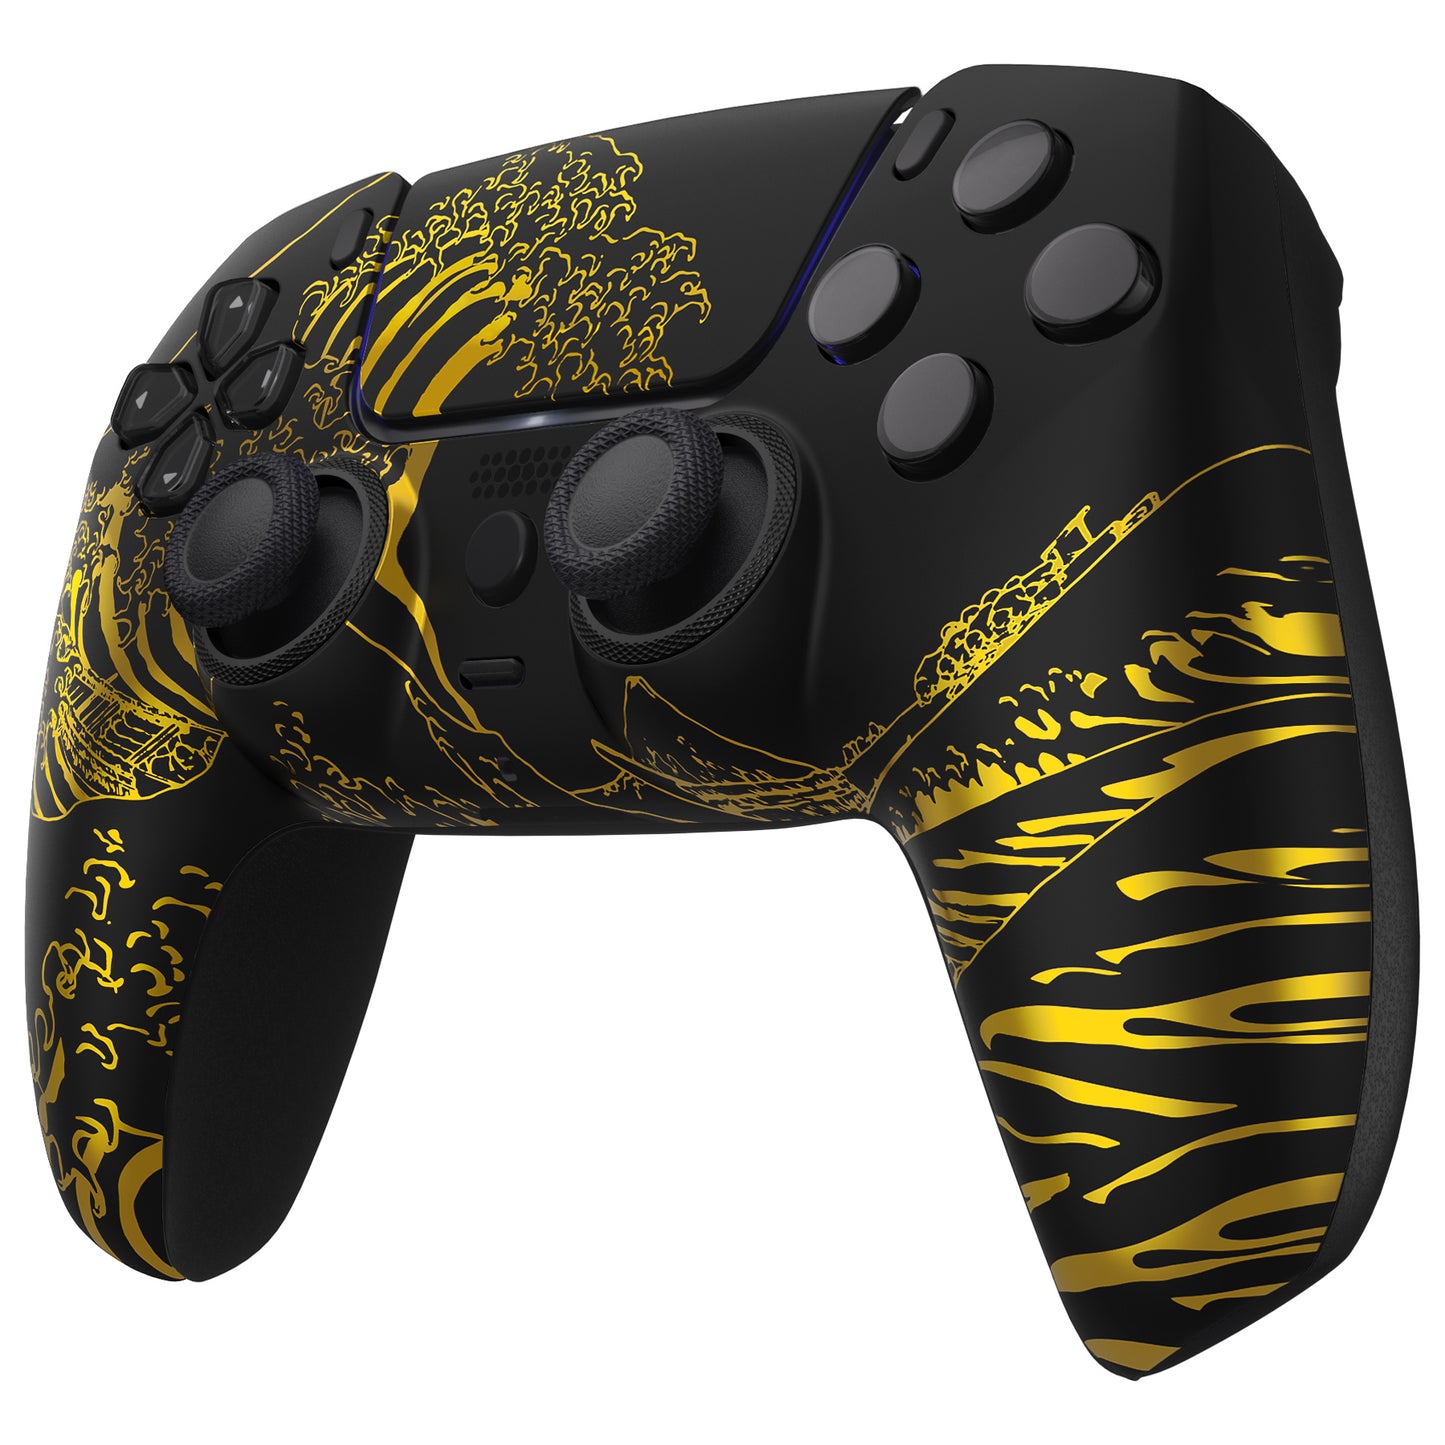 eXtremeRate LUNA Redesigned Replacement Front Shell with Touchpad Compatible with PS5 Controller BDM-010/020/030/040 - The Great GOLDEN Wave Off Kanagawa - Black eXtremeRate